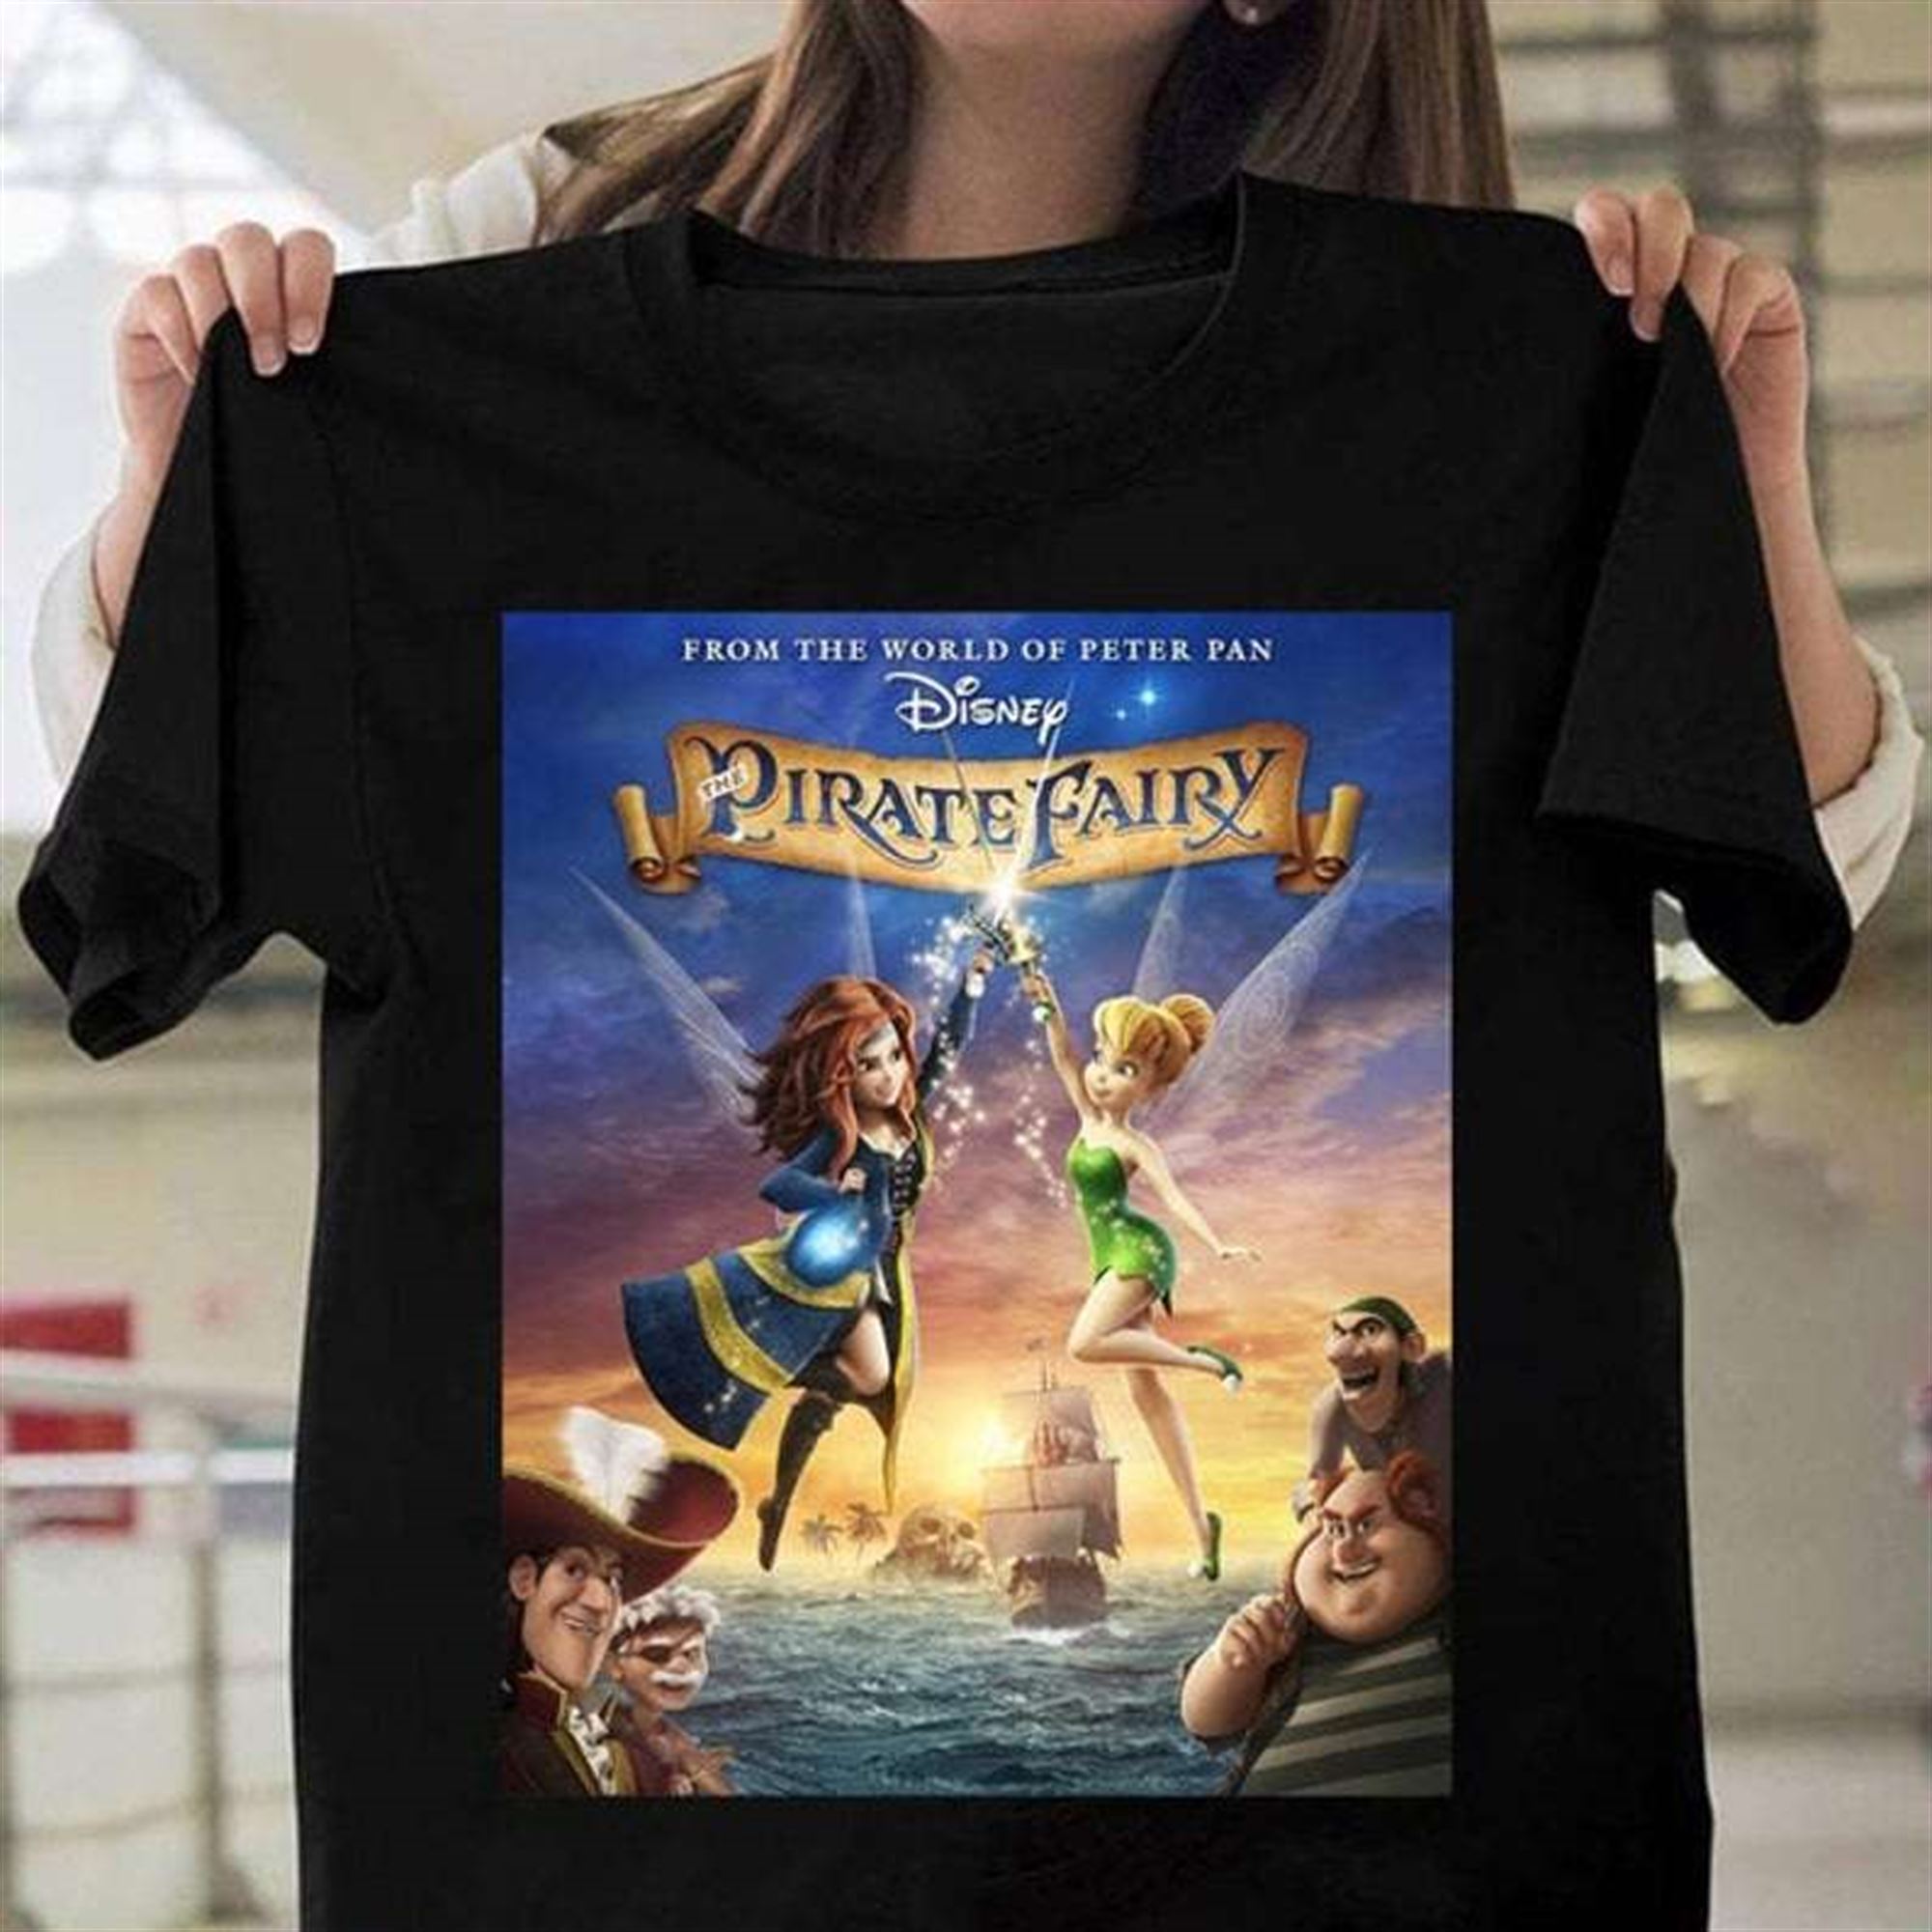 Tinker Bell Peterpan Pirates Fairy T Shirt Size Up To 5xl